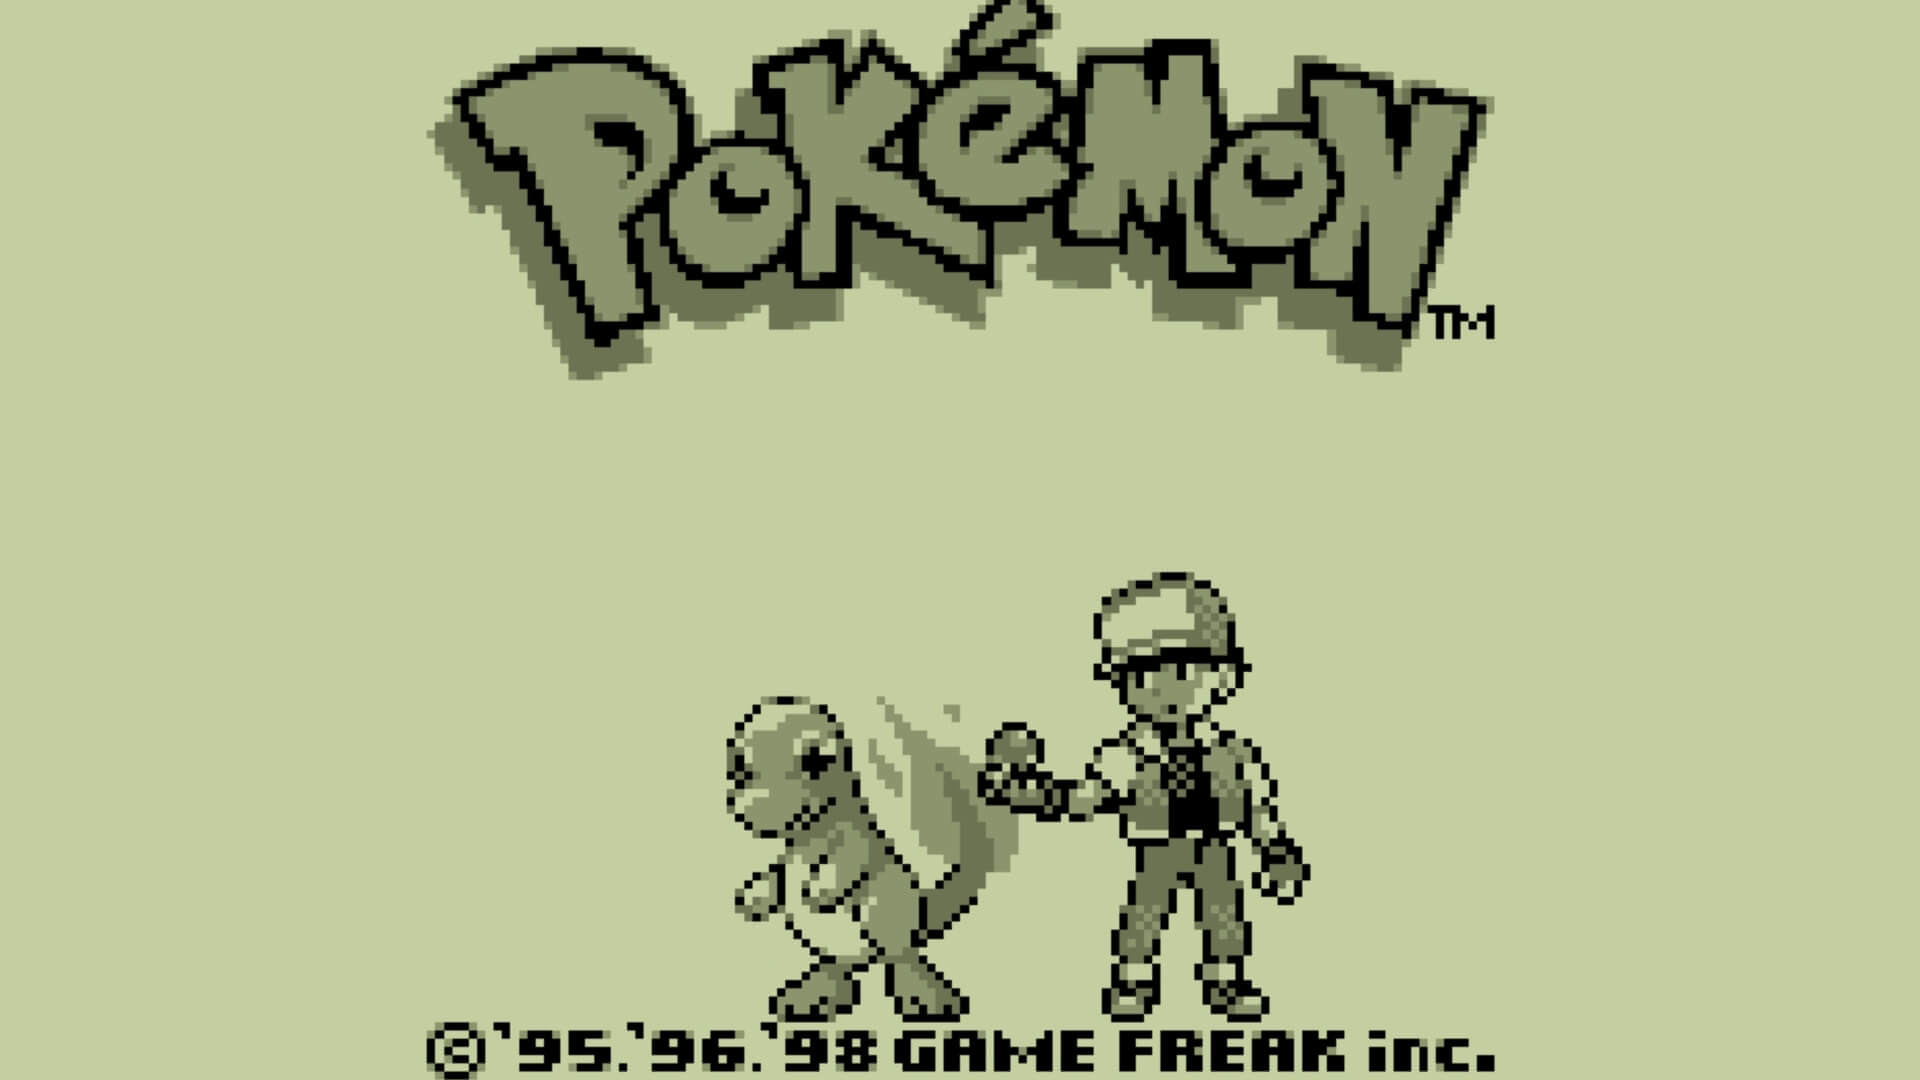 How to Download Pokemon Red/Blue & Yellow! (HD 1080p) Tutorial+Download 